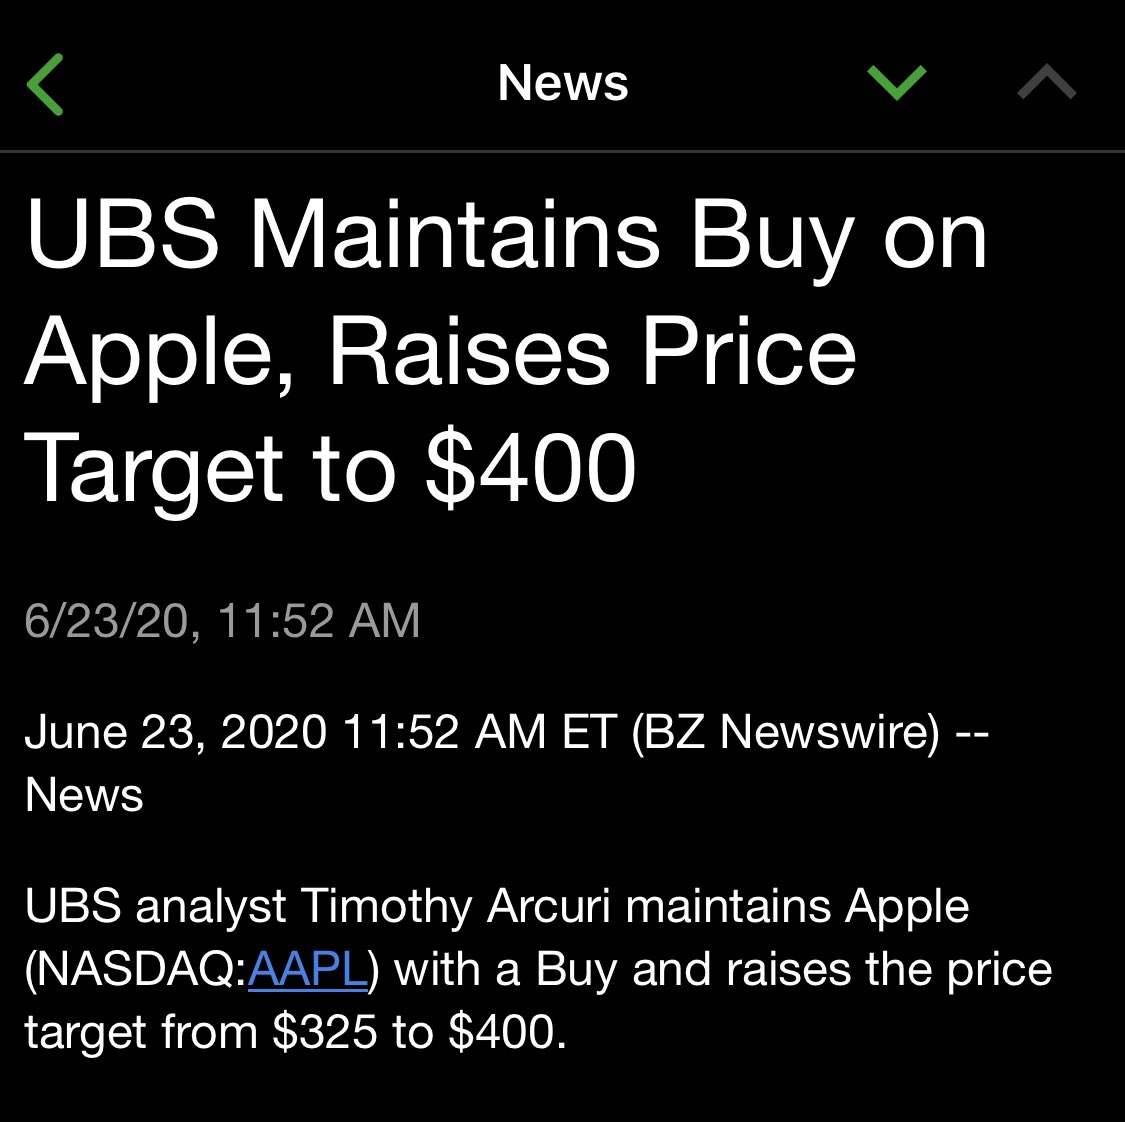 Analyst actions on Apple after yesterday’s  #WWDC announcementsUBS analyst Timothy Arcuri maintains Apple with a Buy and raises the price target from $325 to $400. $aapl  $ubs